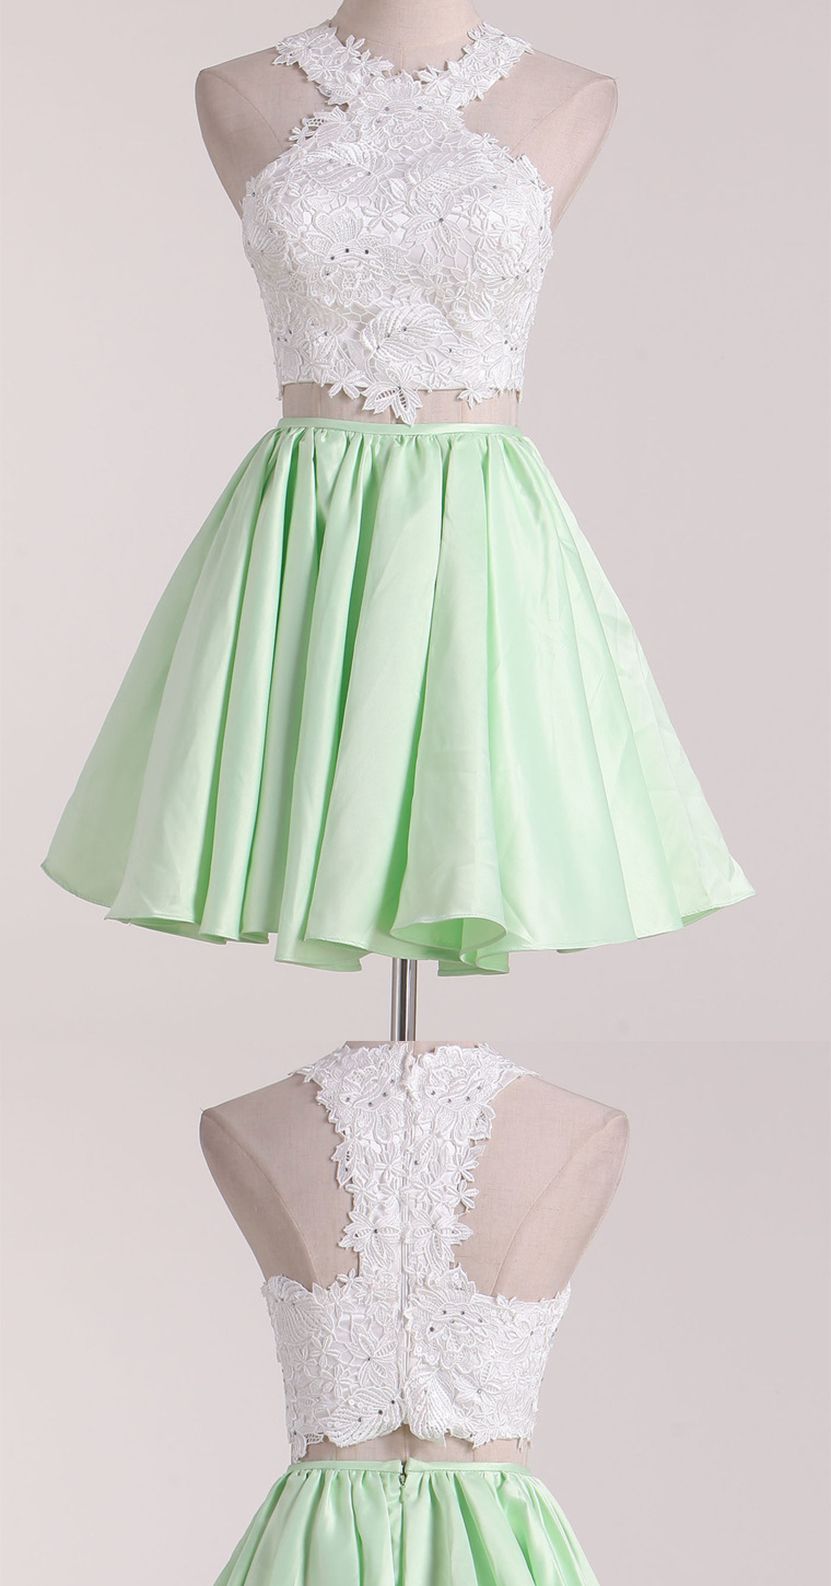 Two Piece Lace Short Homecoming Dress, Sexy Scoop Satin Short Prom Dress, Light Green Satin Two Pieces Prom Dress Short .